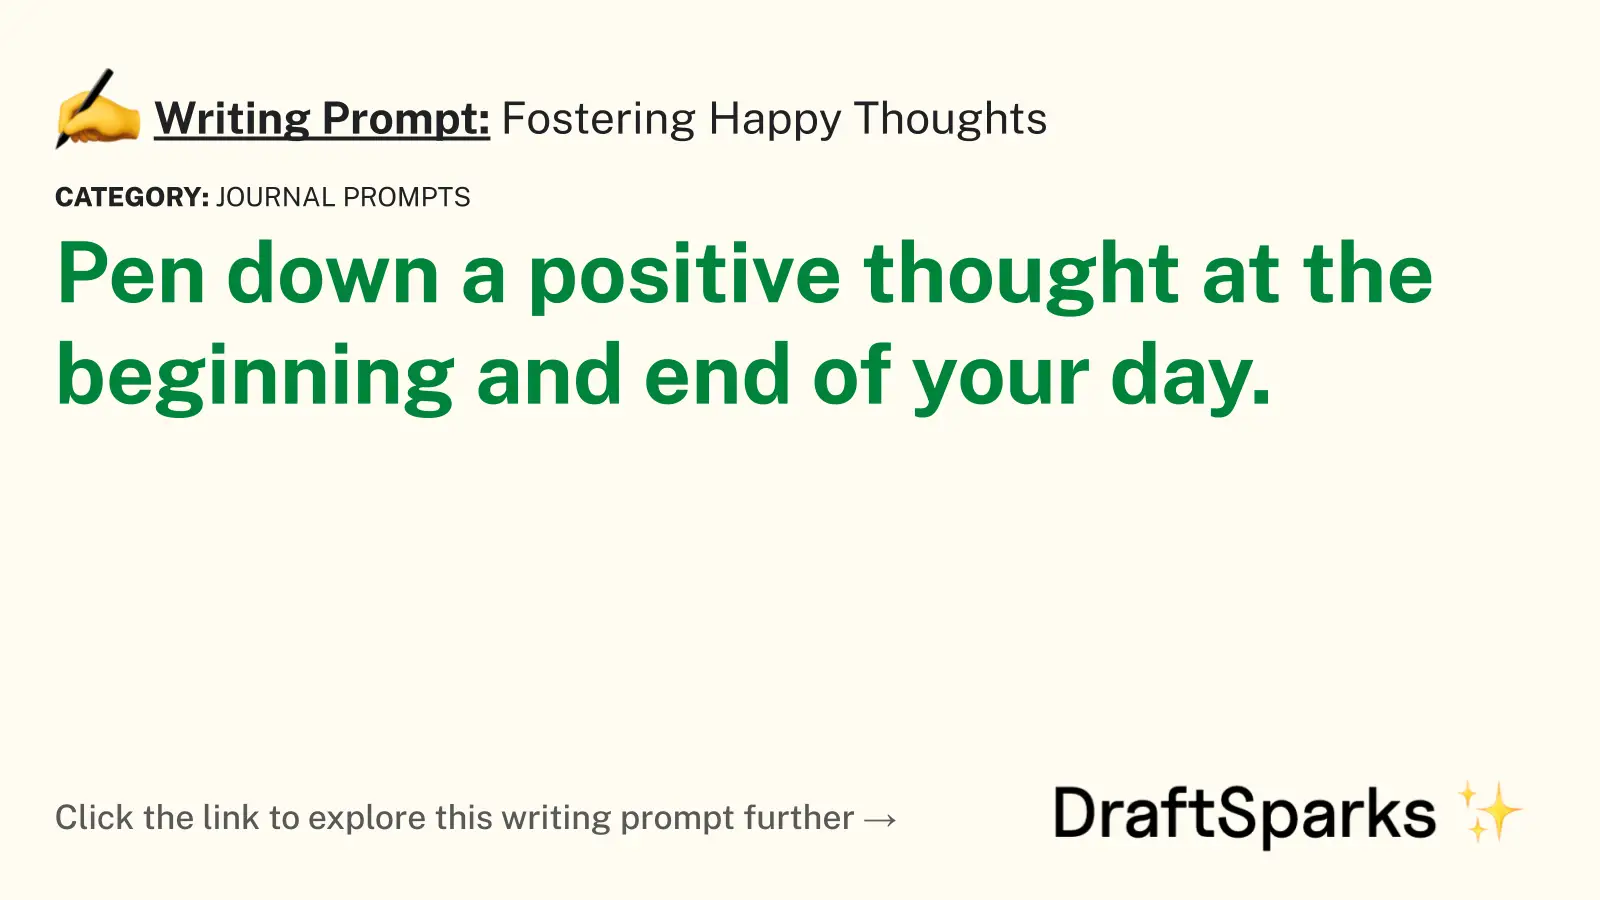 Fostering Happy Thoughts